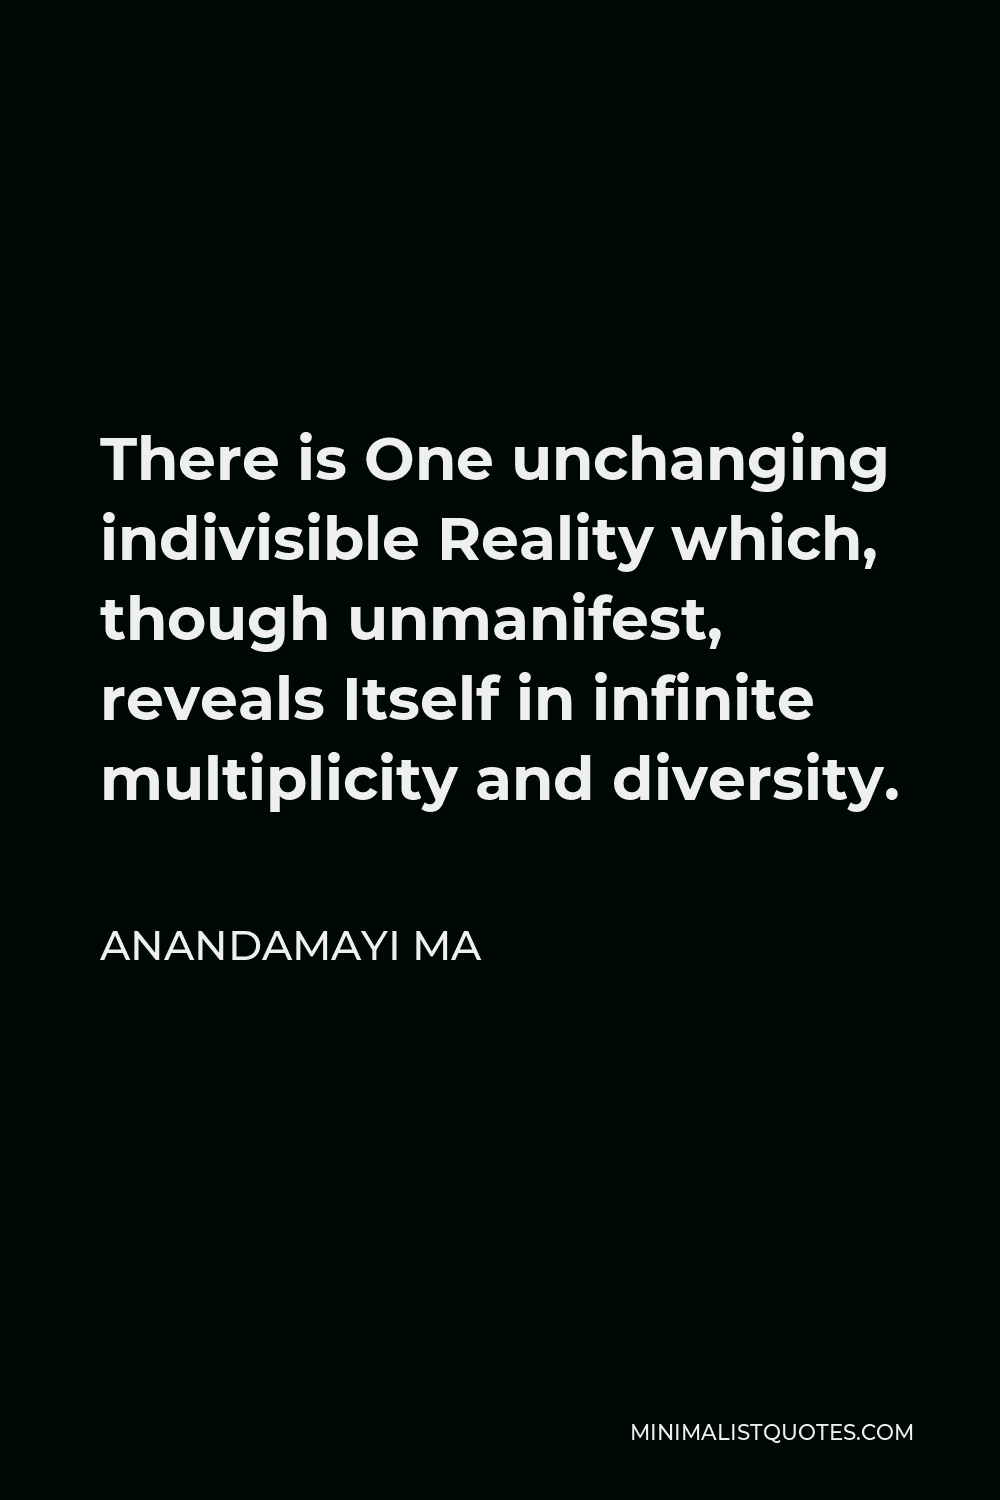 Anandamayi Ma Quote - There is One unchanging indivisible Reality which, though unmanifest, reveals Itself in infinite multiplicity and diversity.